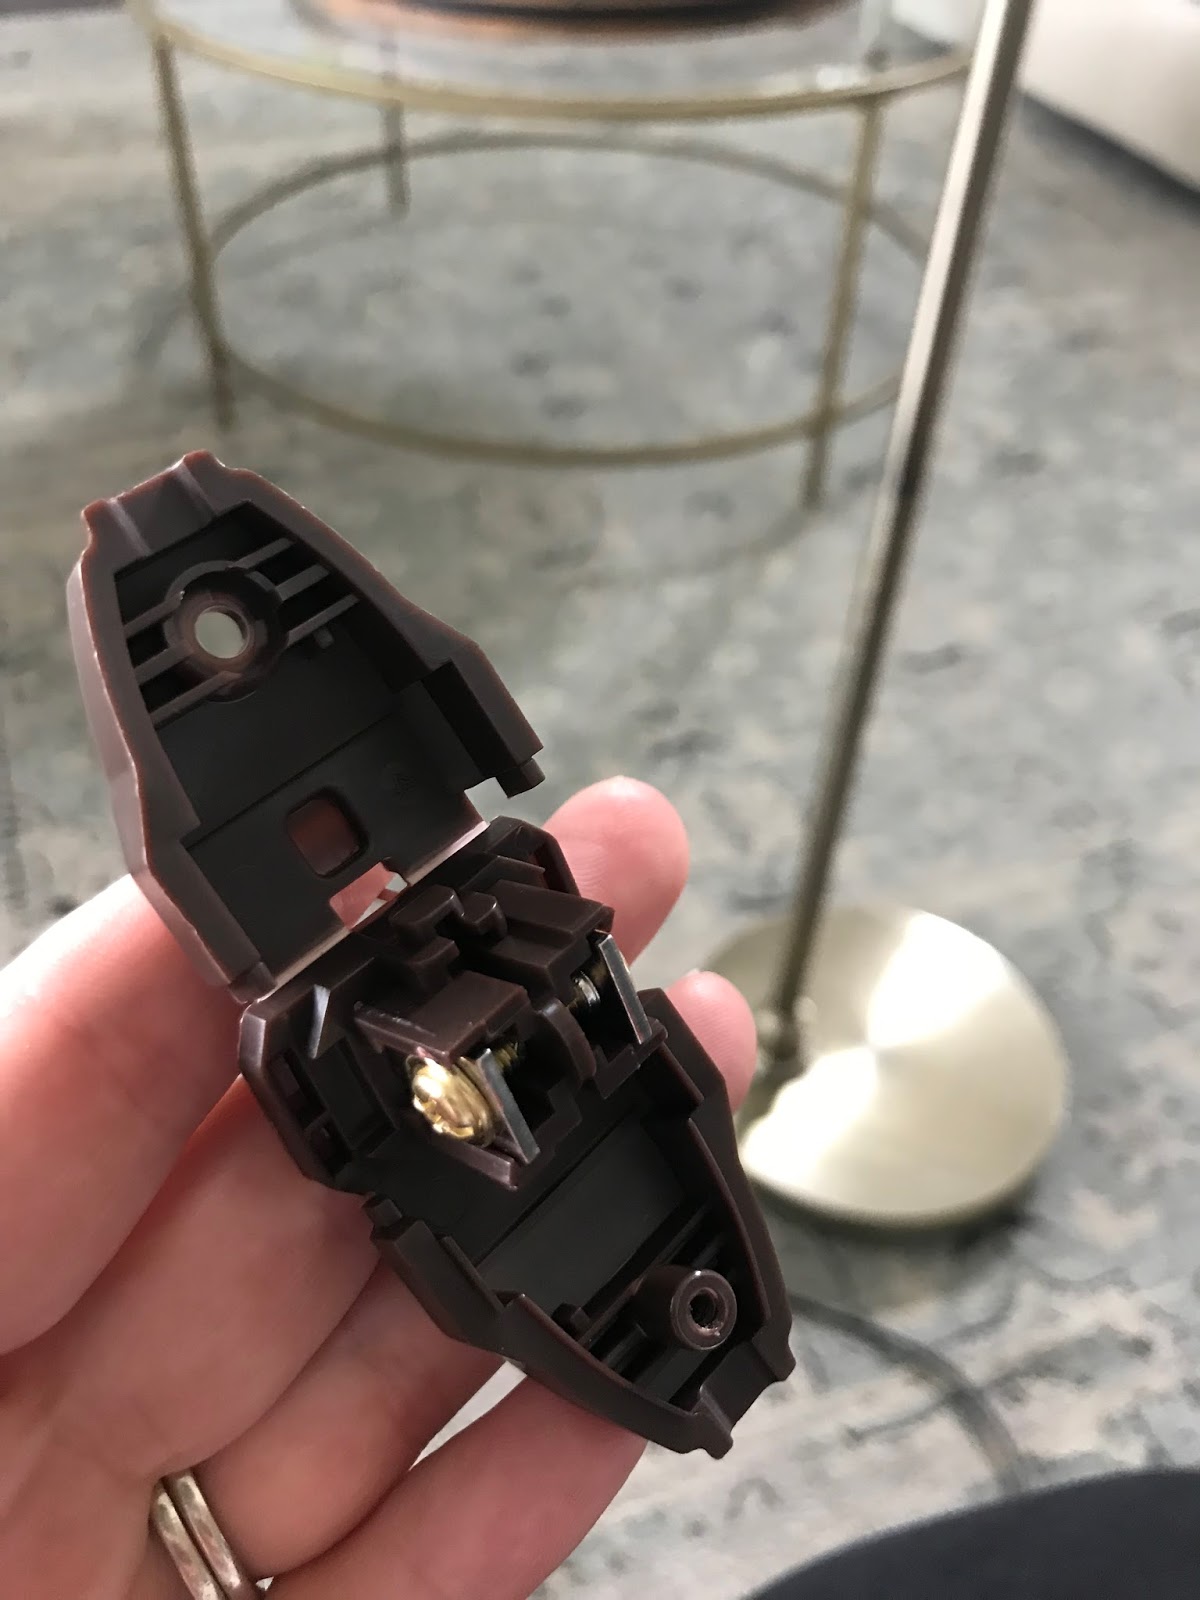 How to replace a broken lamp plug